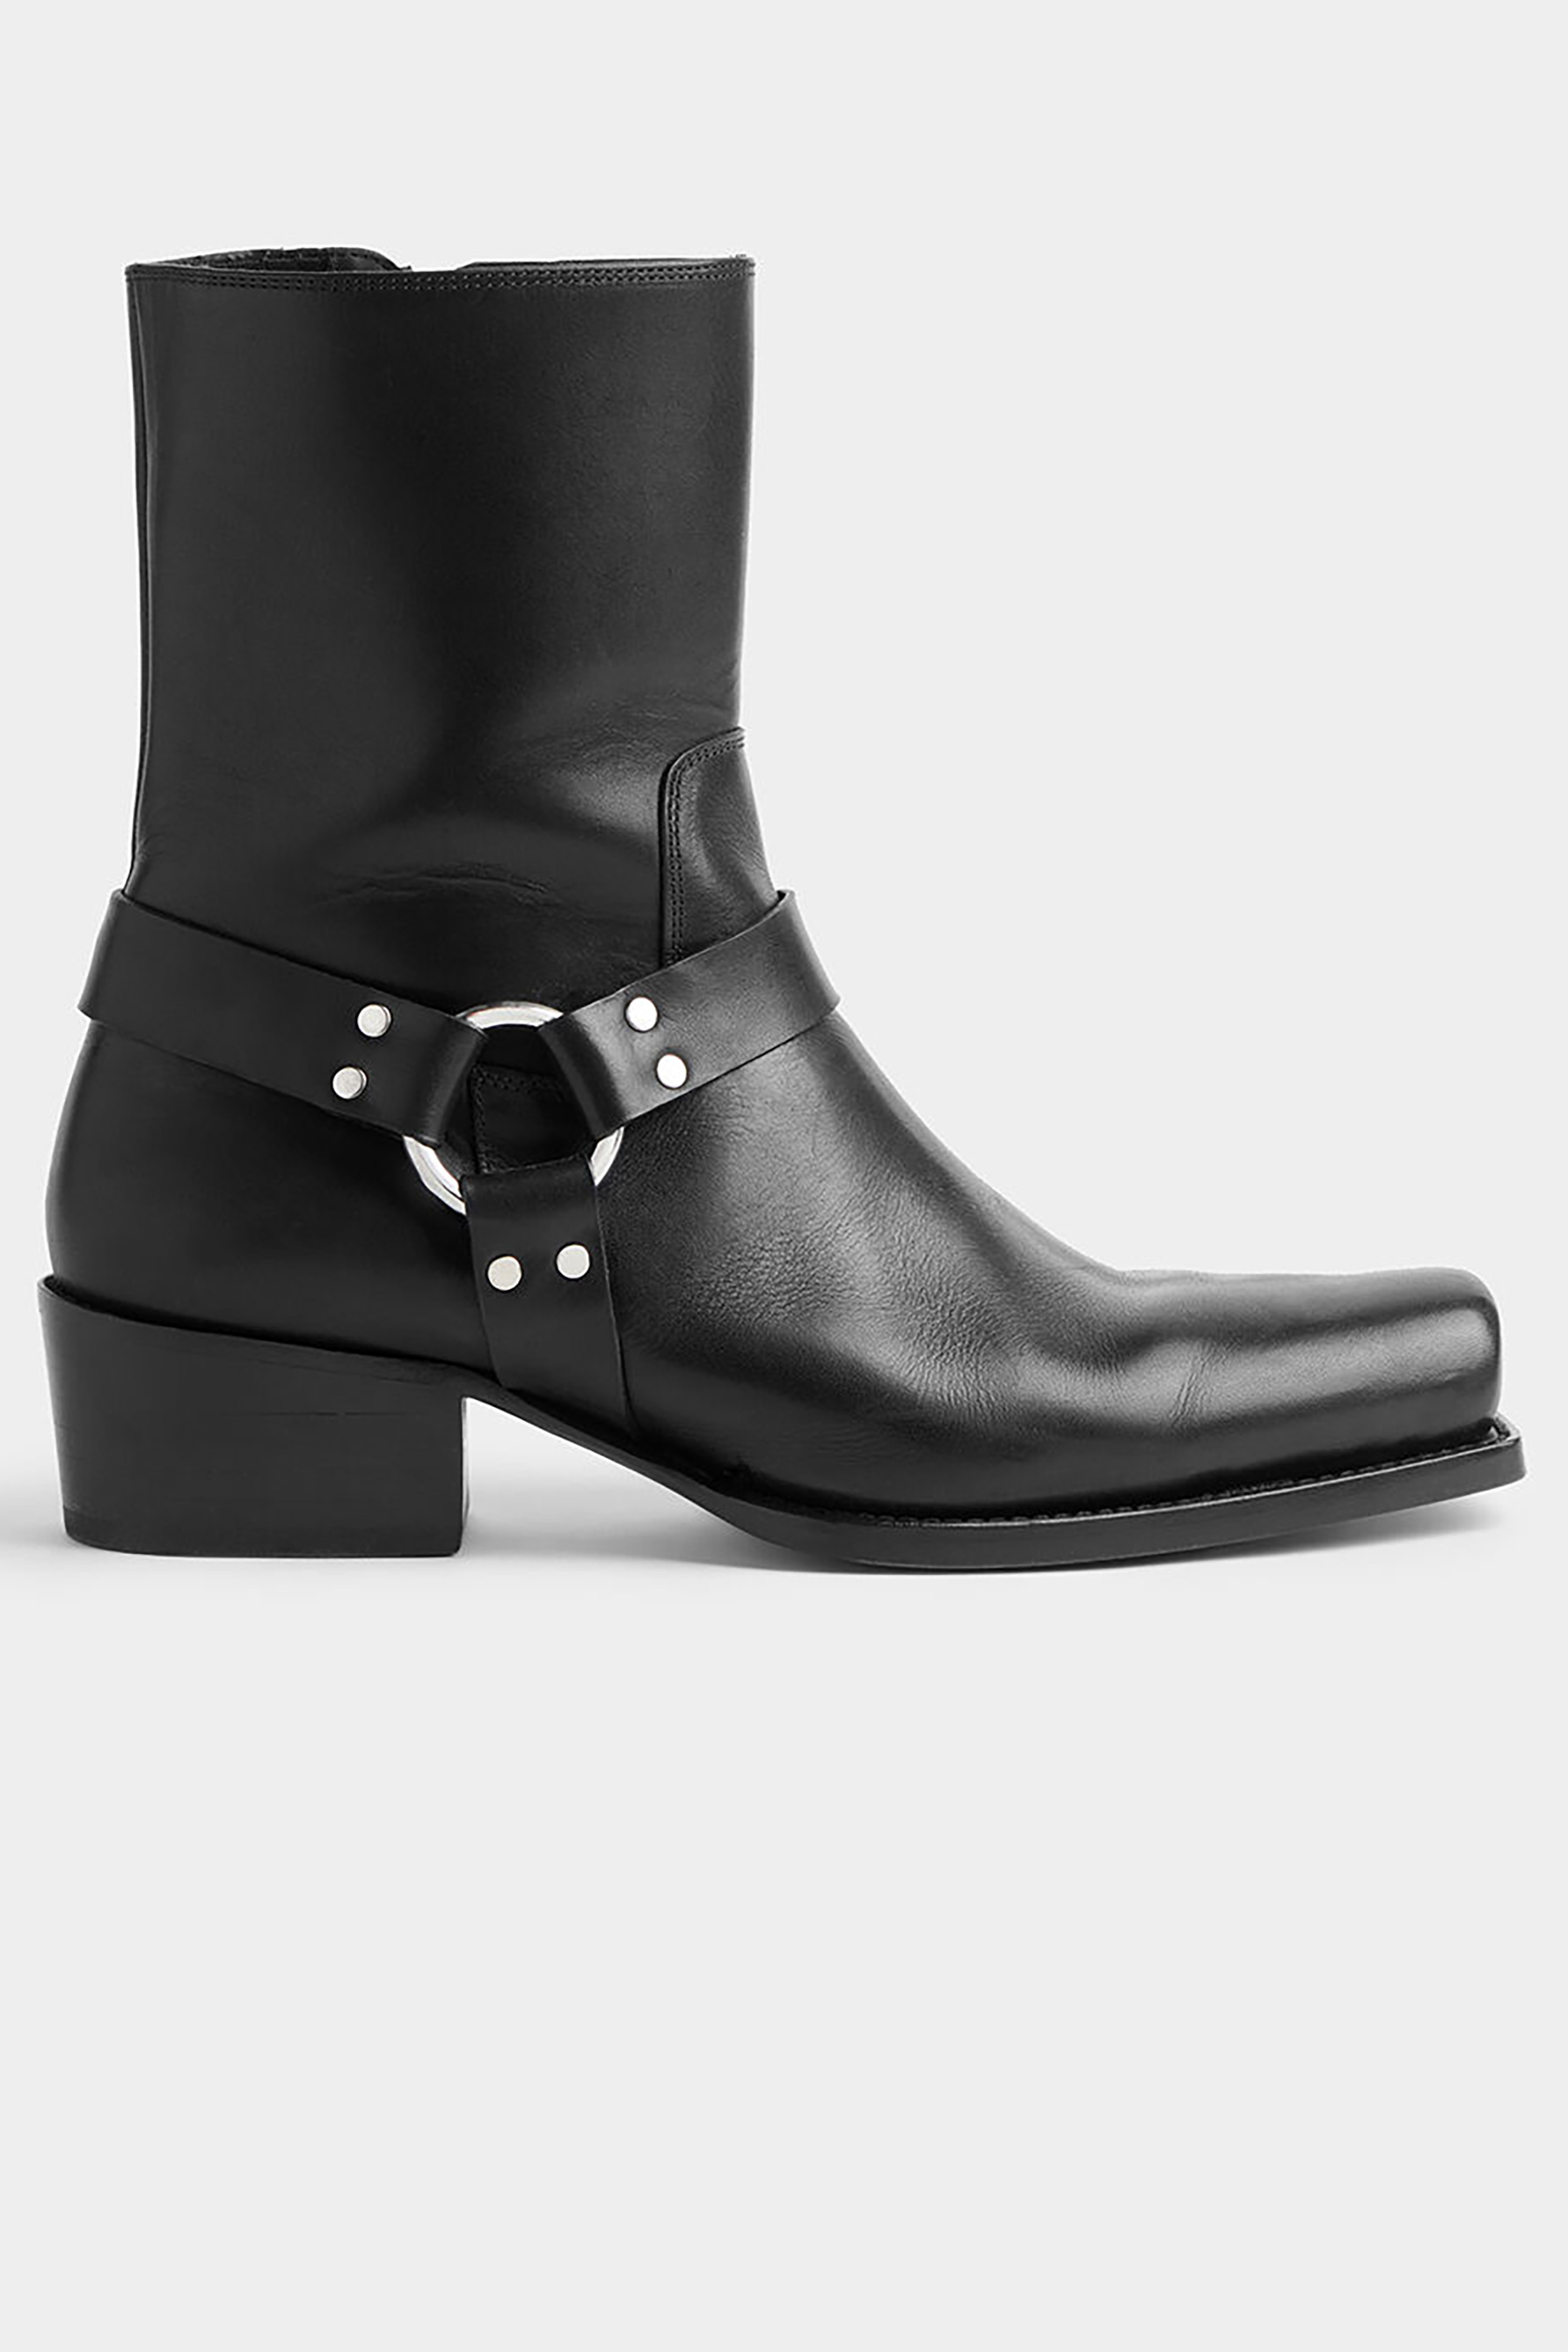 Ring Leather Biker Boots